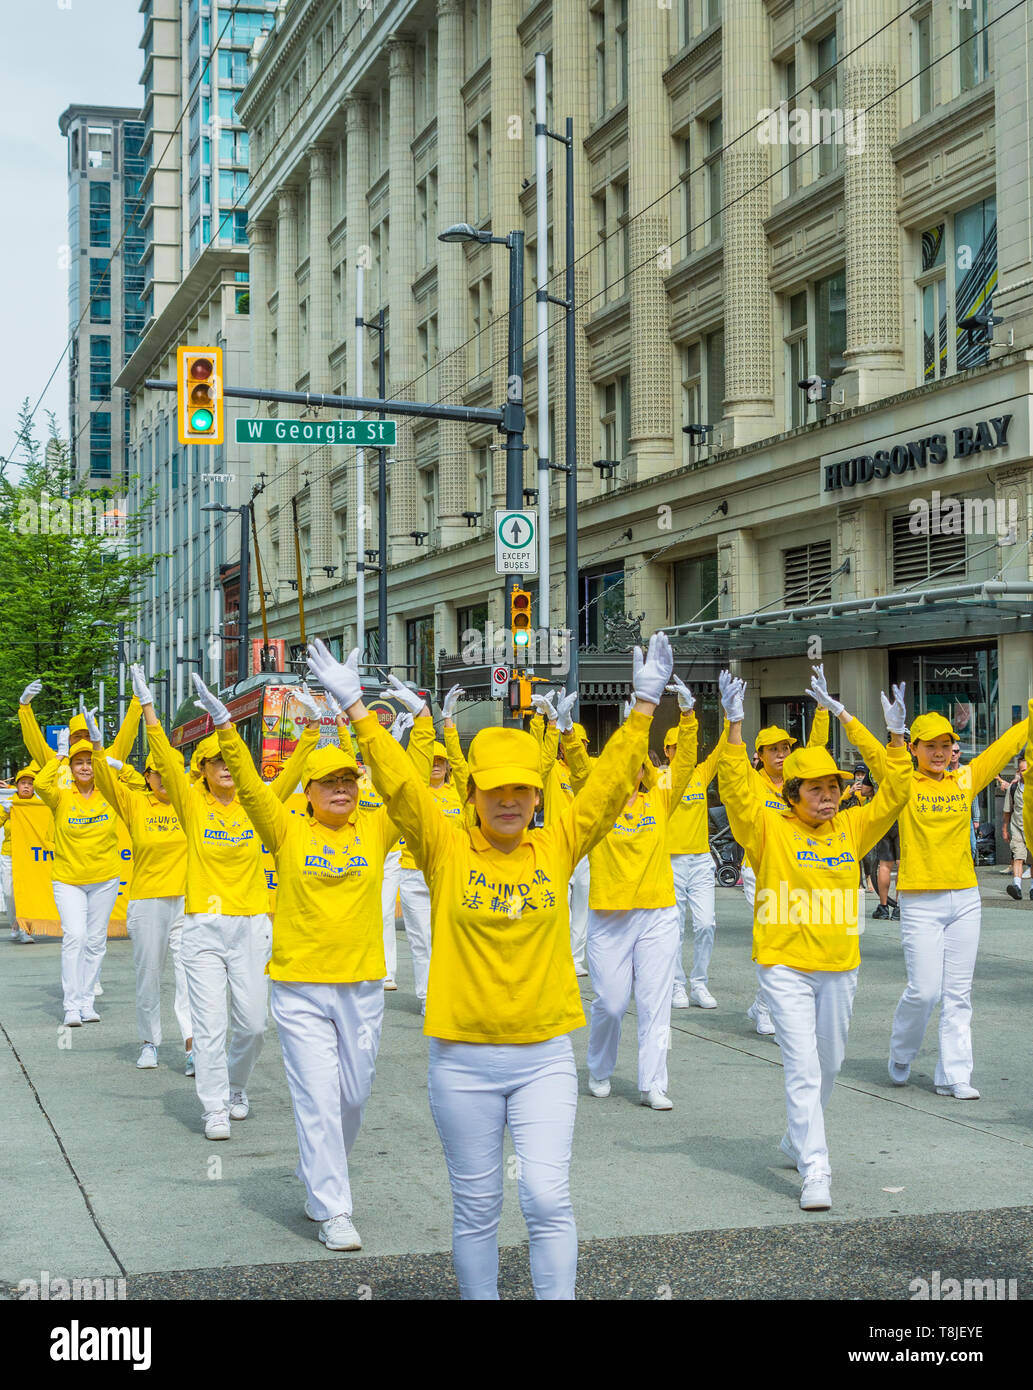 Falun Dafa, also known as Falun Gong, practitioners march in parade through streets of downtown Vancouver on Mother's Day 2019. Stock Photo